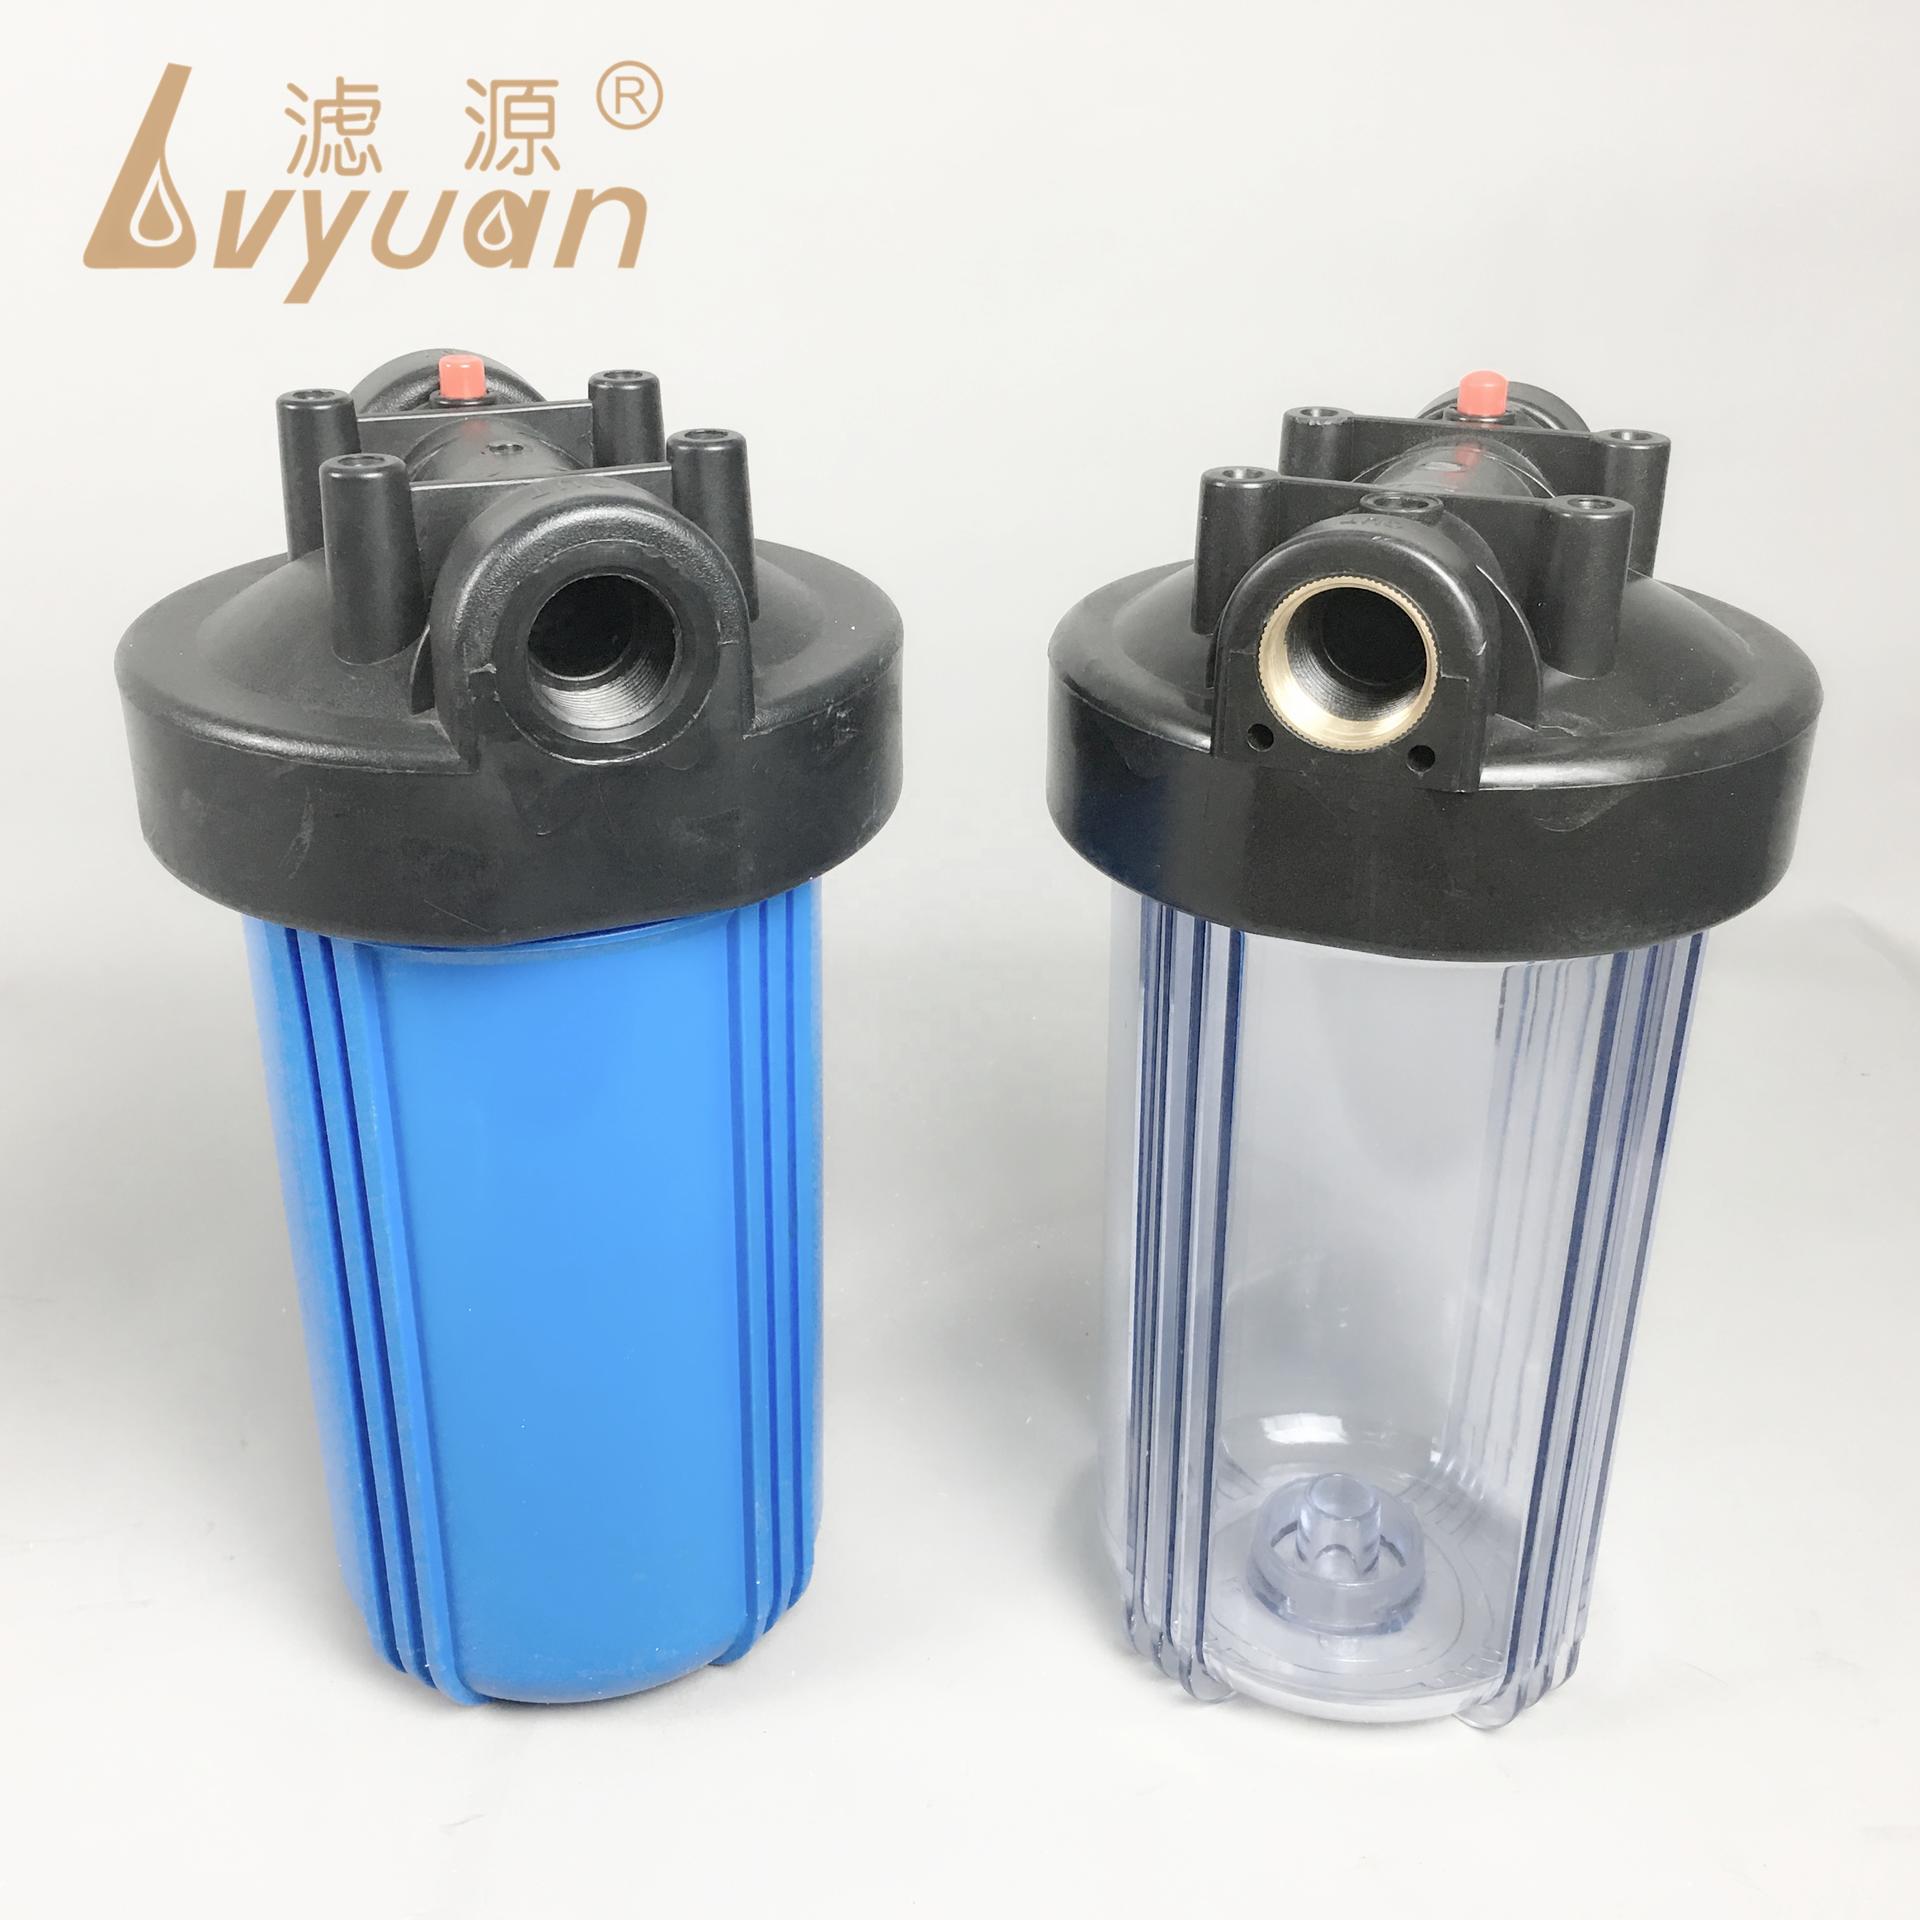 Water filter housing 5 10 inch 20'' big blue filter housing for water treatment/water filtration